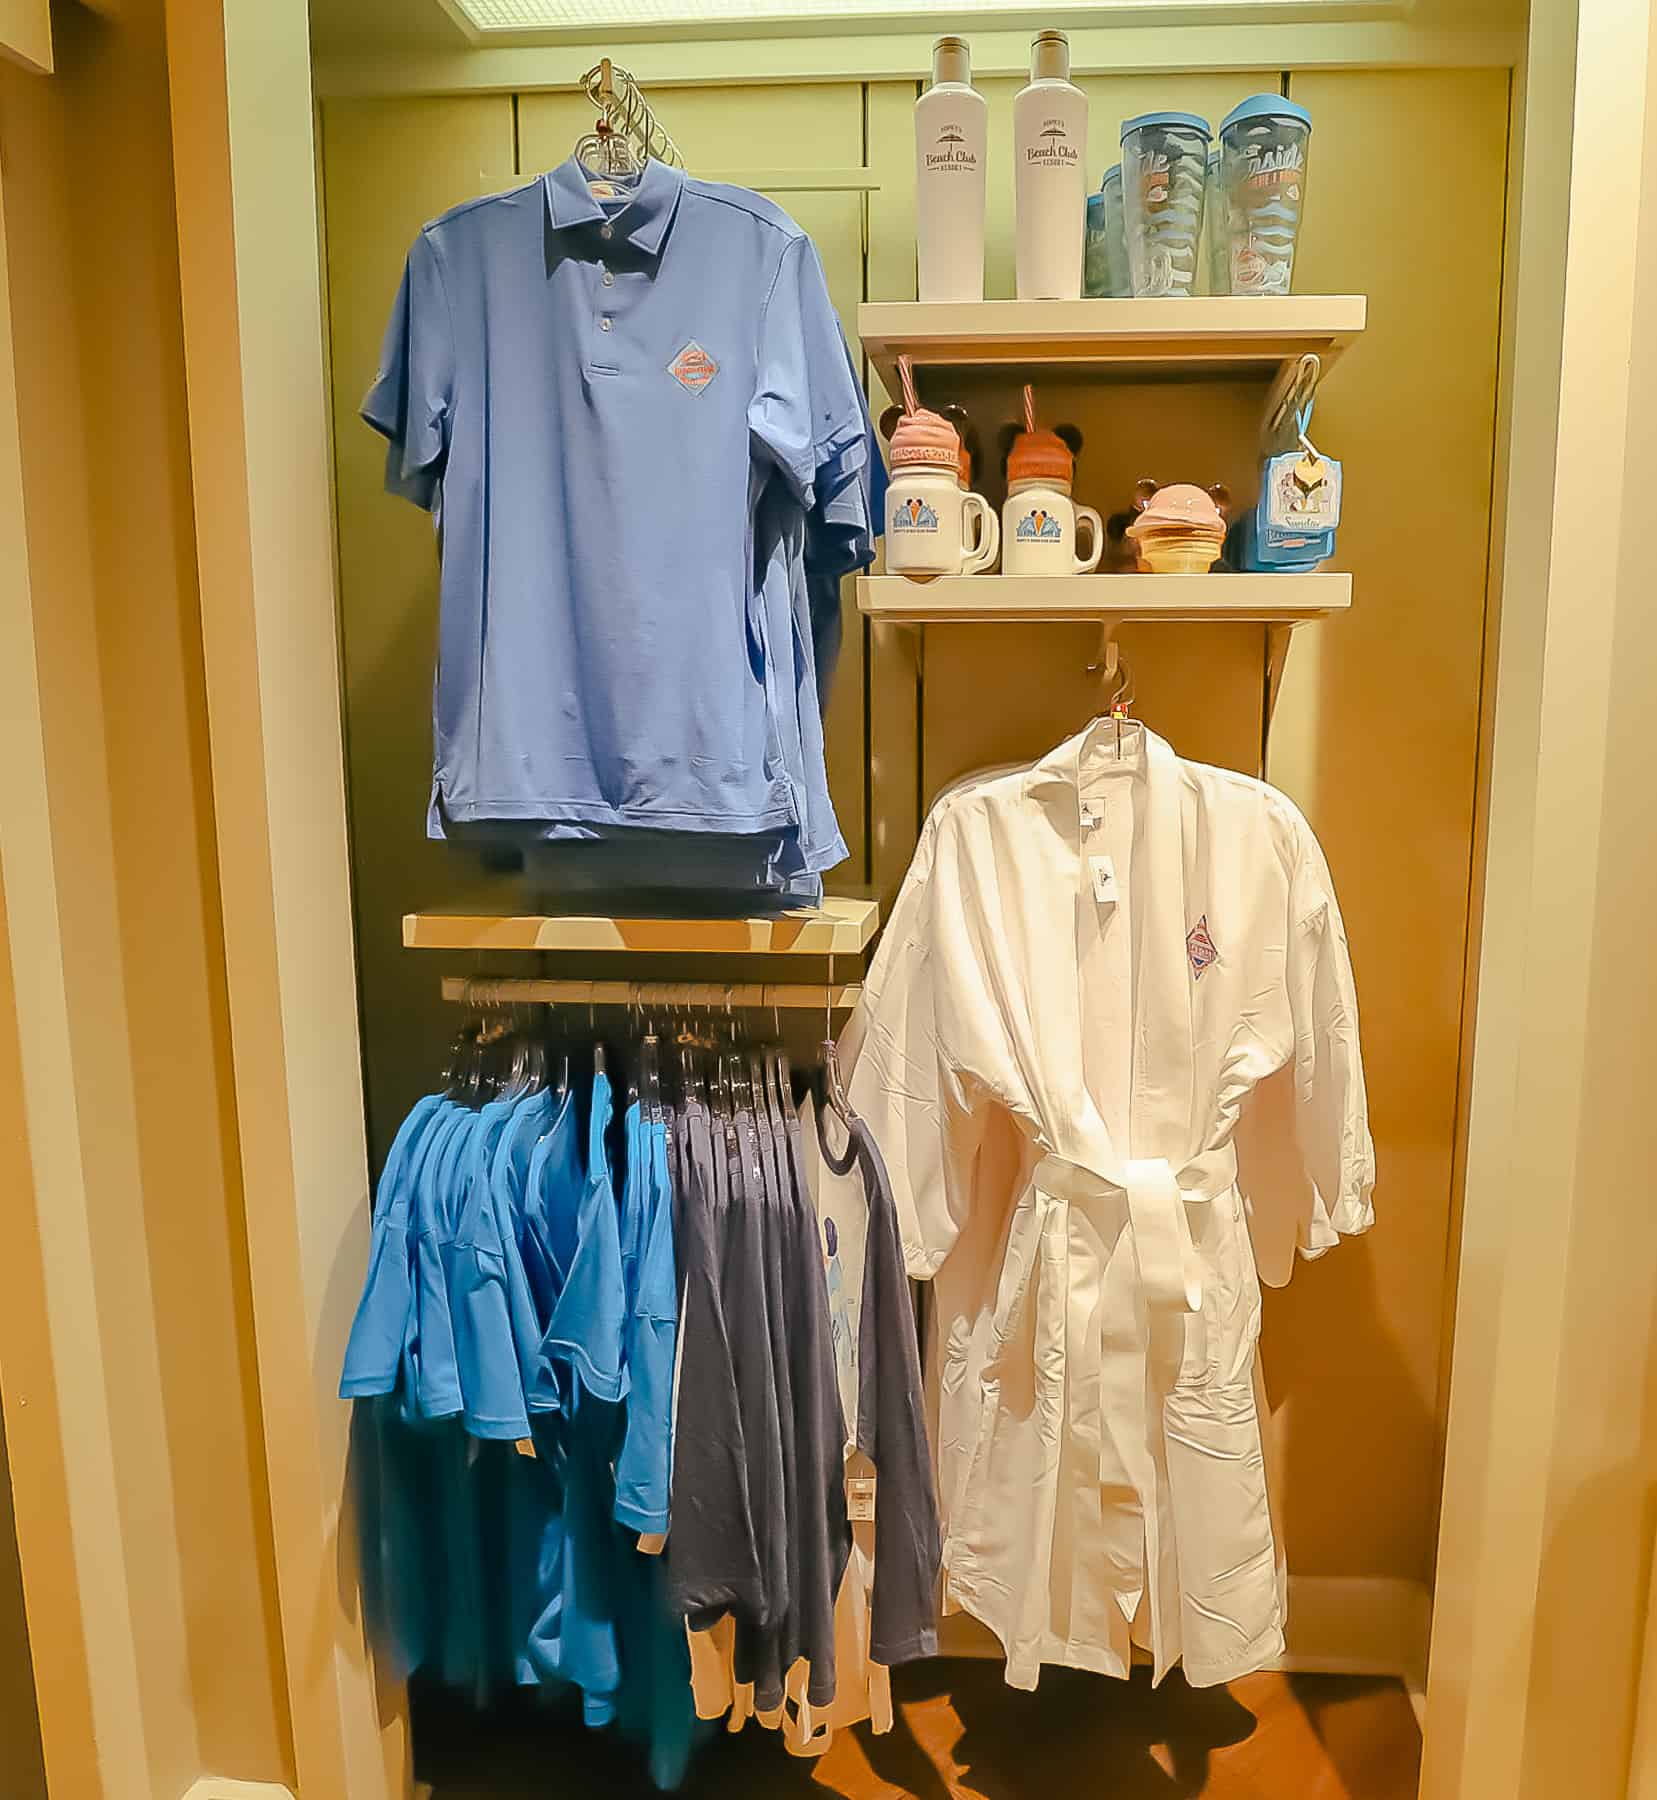 Beach Club merchandise includes a robe, polo shirt, mugs, tumblers, and other items with the Beach Club's logl. 